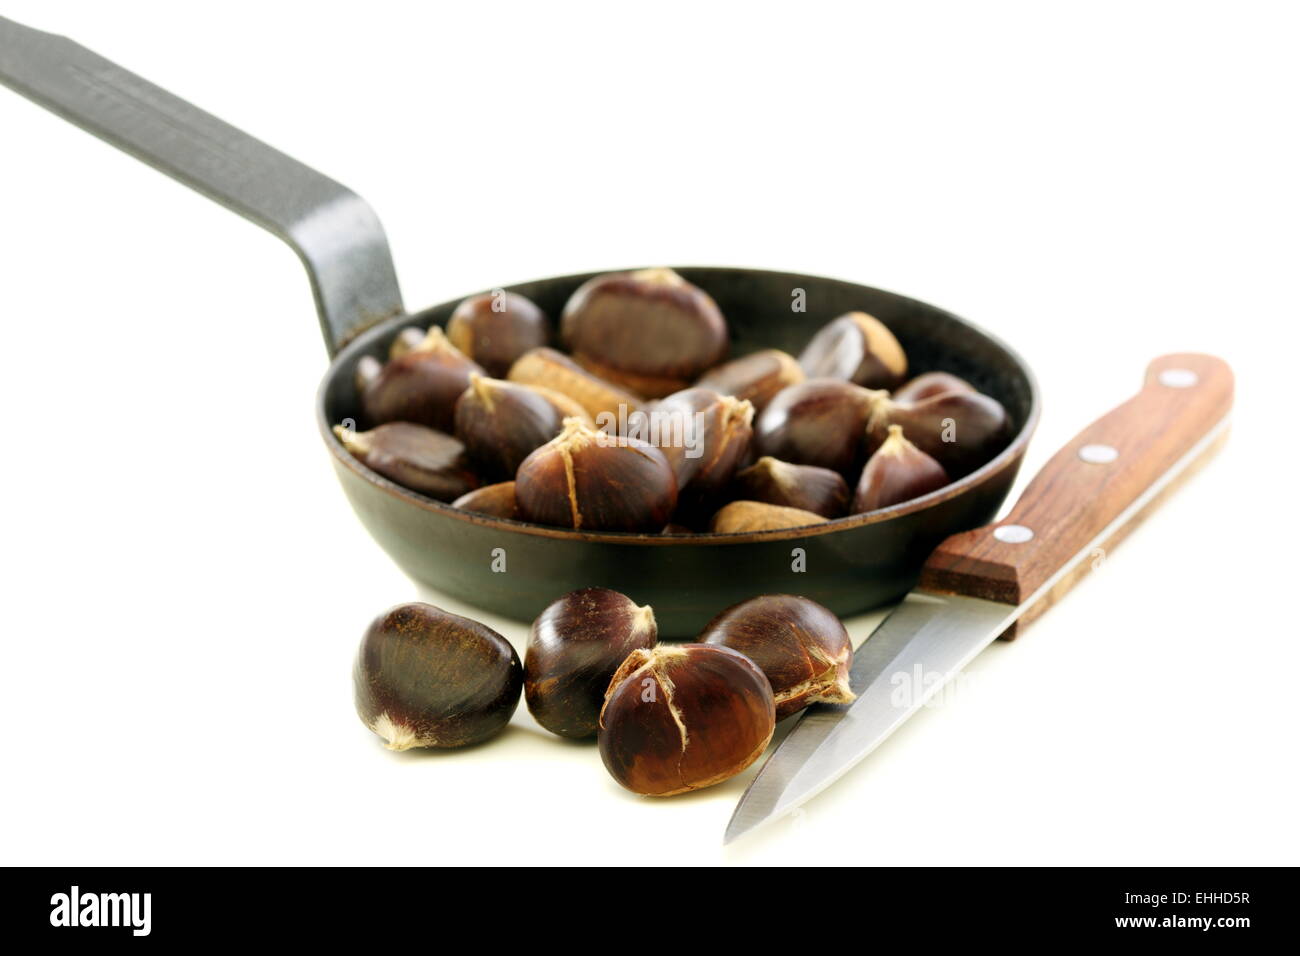 Knife and the chestnuts in a pan. Stock Photo